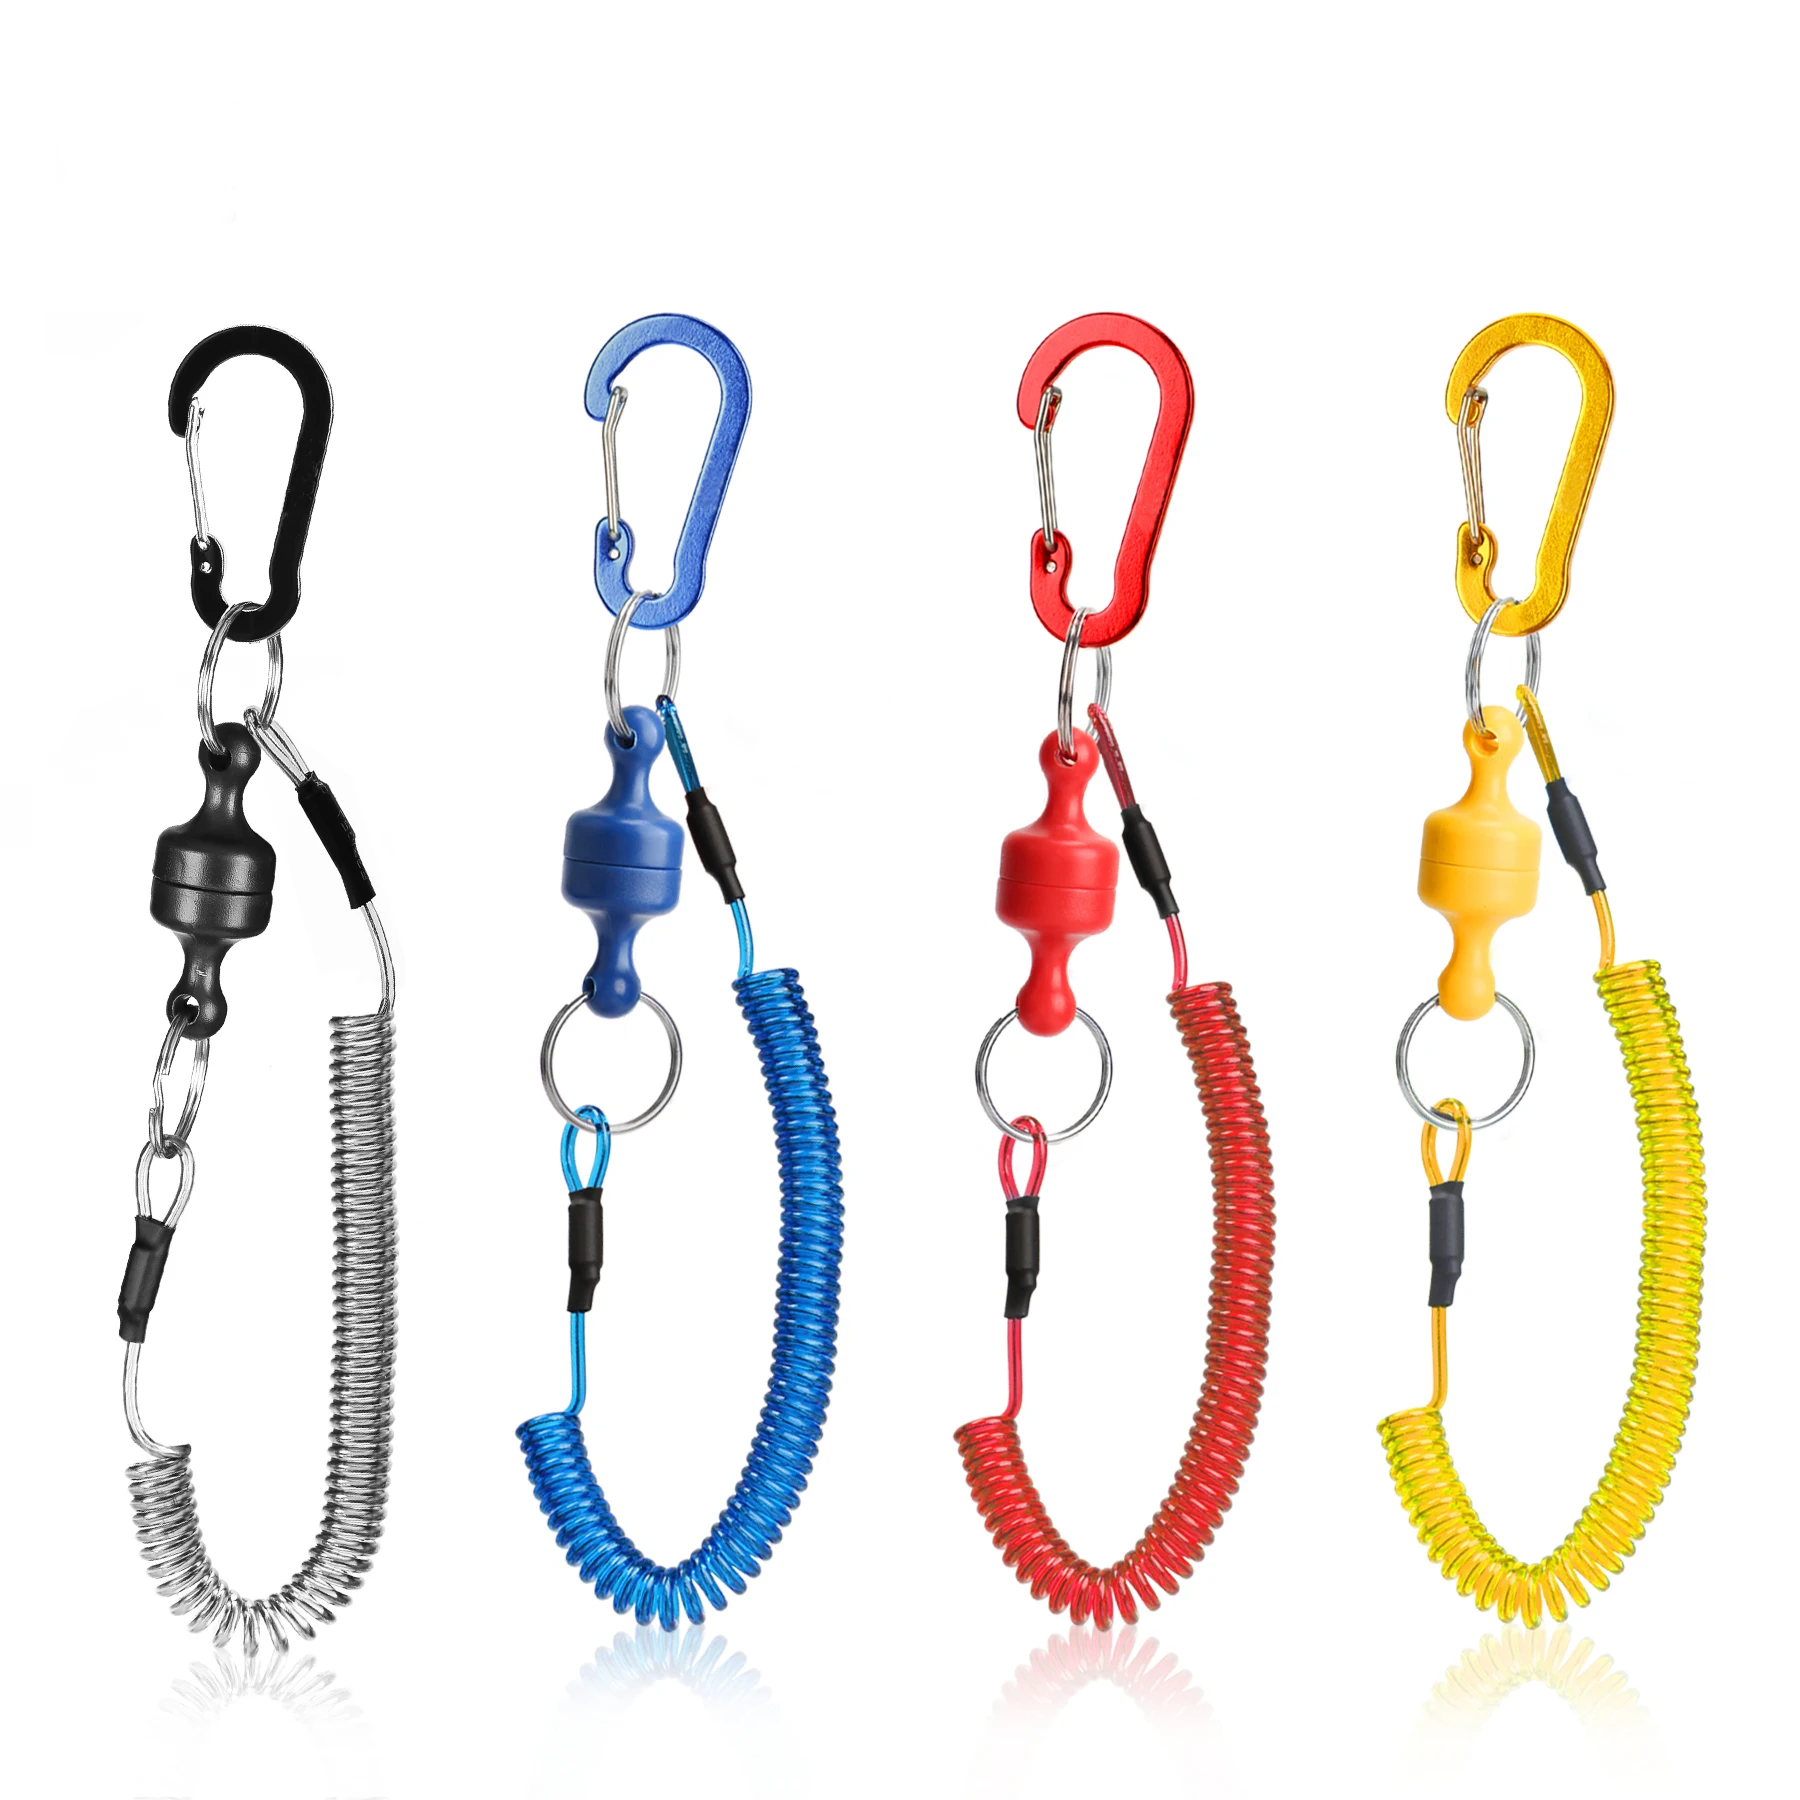 Strong Magnetic Release Clip Net Rack with Fishing Tools Coiled Lanyard 1.5m Fishing Coil Lanyard Hook Buckle for Fly Fishing